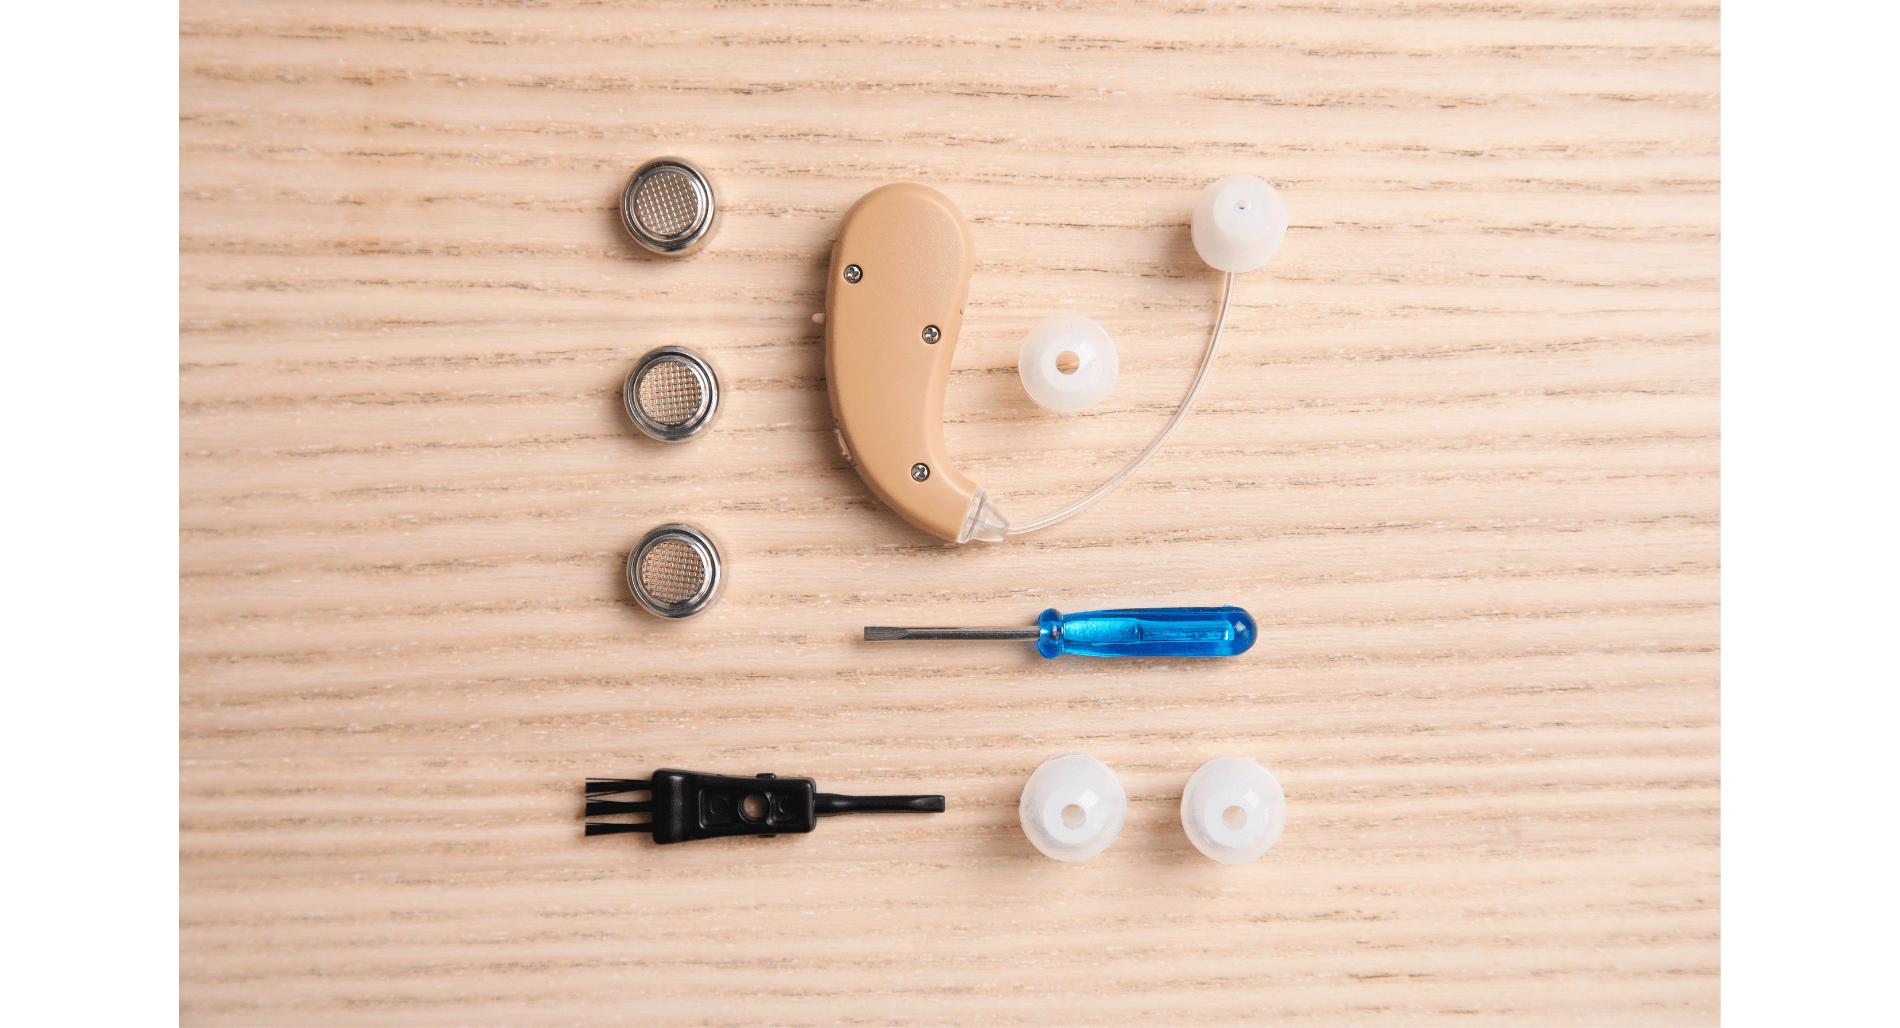 Hearing aid and maintenance tools on table